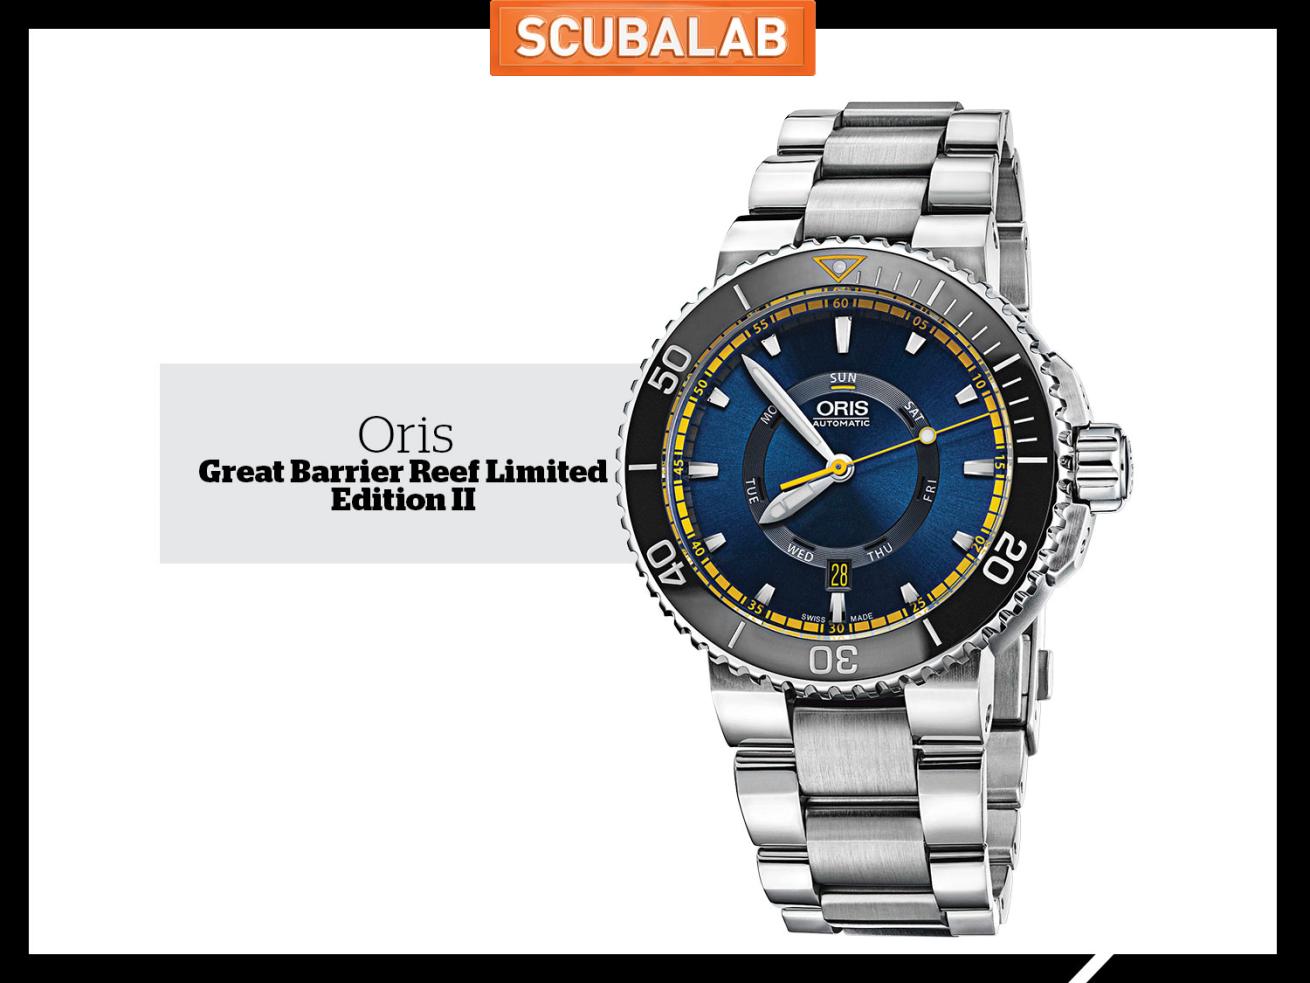 Oris Great Barrier Reef limited Edition II dive watch.